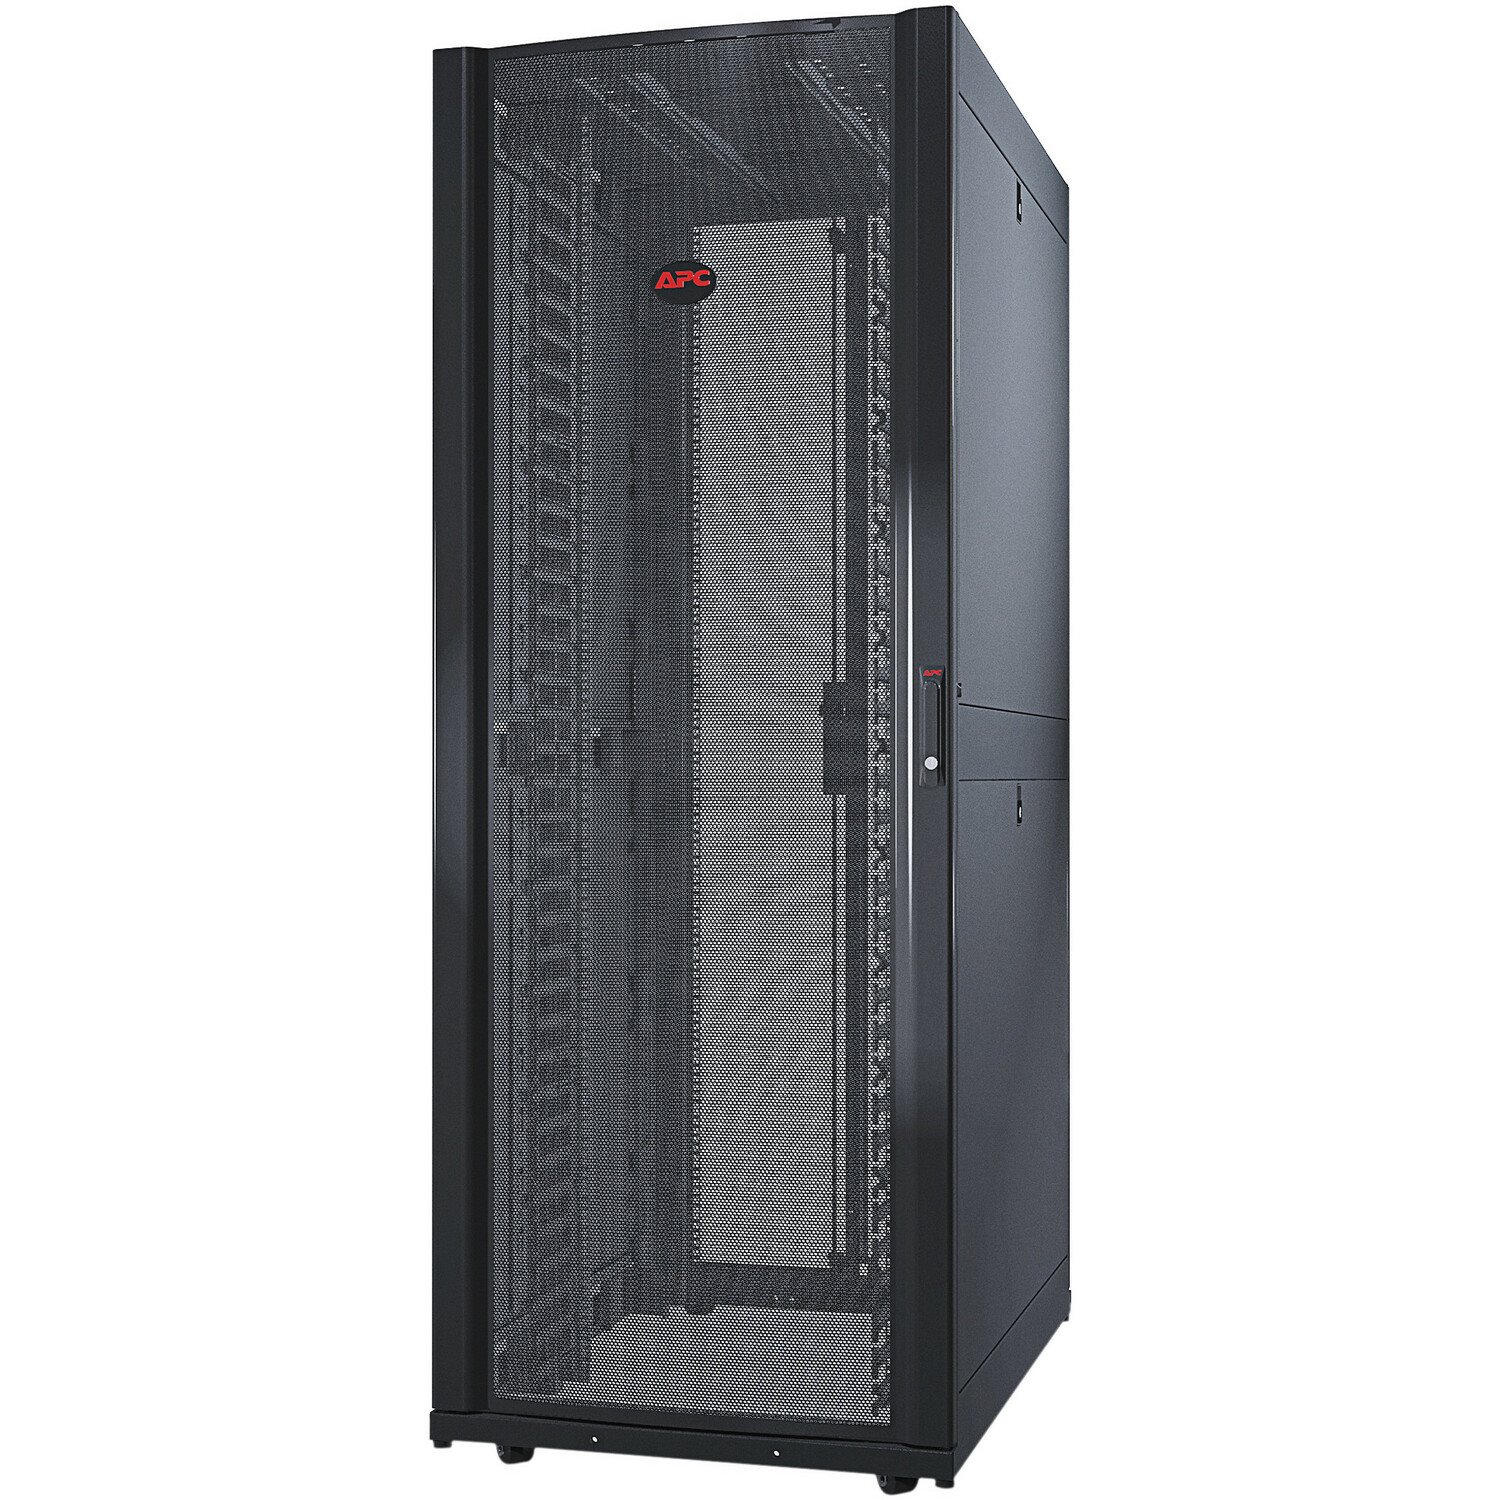 AR3140 APC NetShelter SX, Networking Rack Enclosure, 42U, Black, 1991H x 750W x 1070D mm with Casters, Feet, Vertical Cable Managers, Side Panels